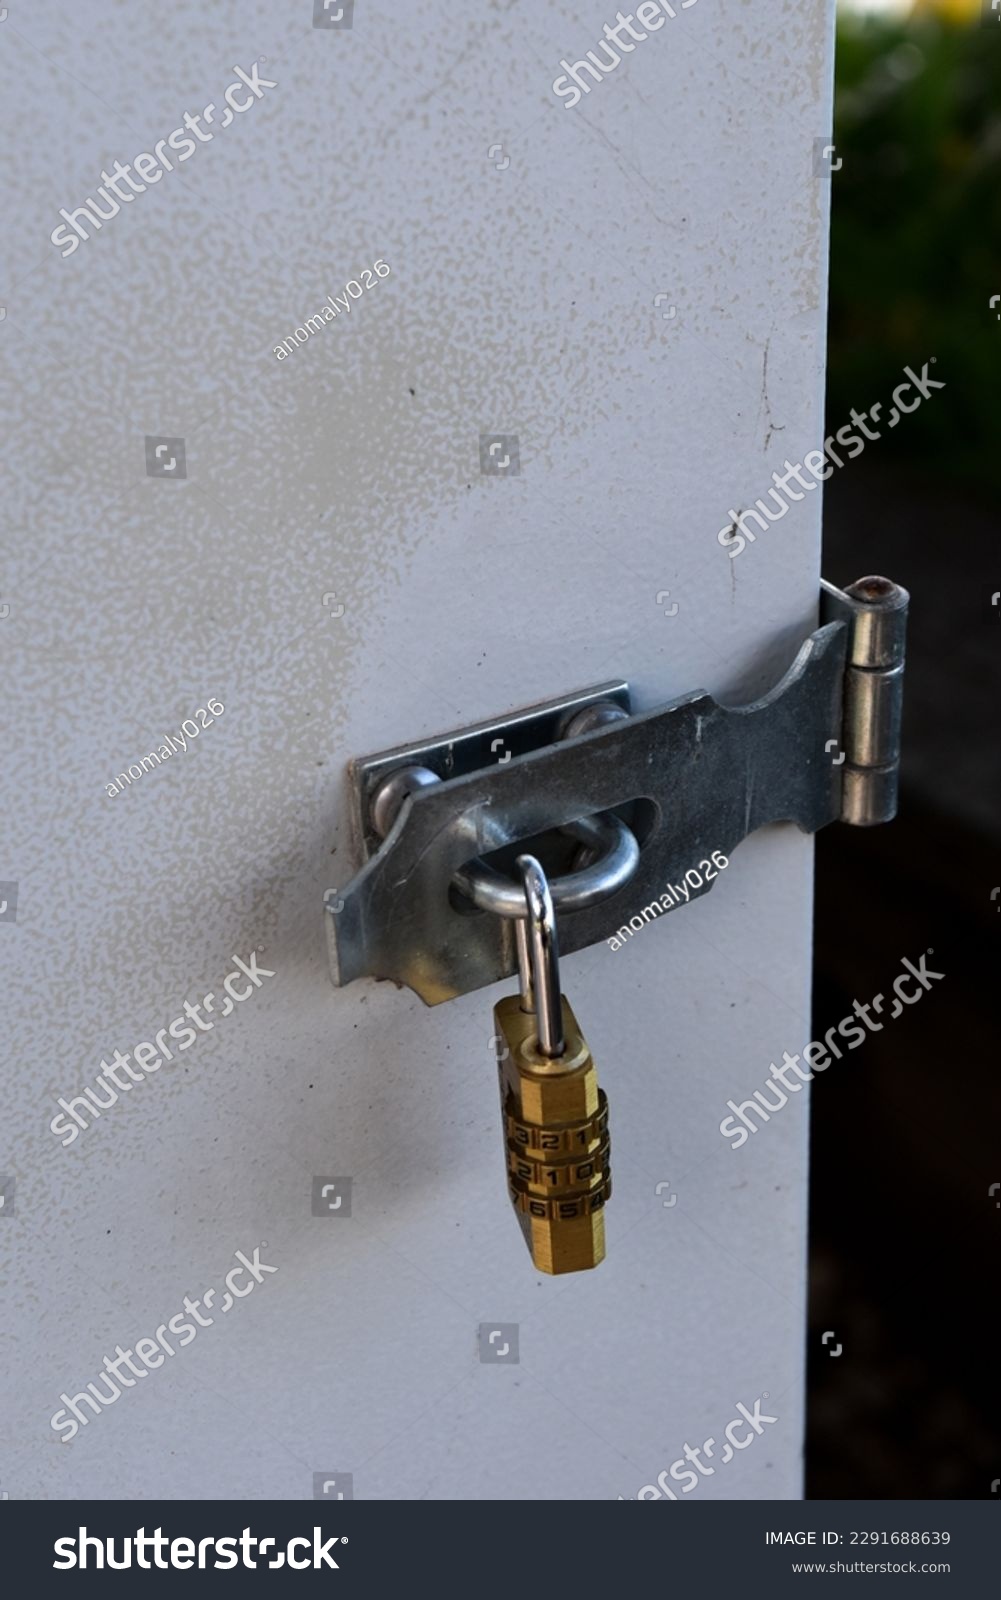 A padlock attached to a door or fence, photo taken in a town called montreux, april 19, 2023, switzerland. #2291688639